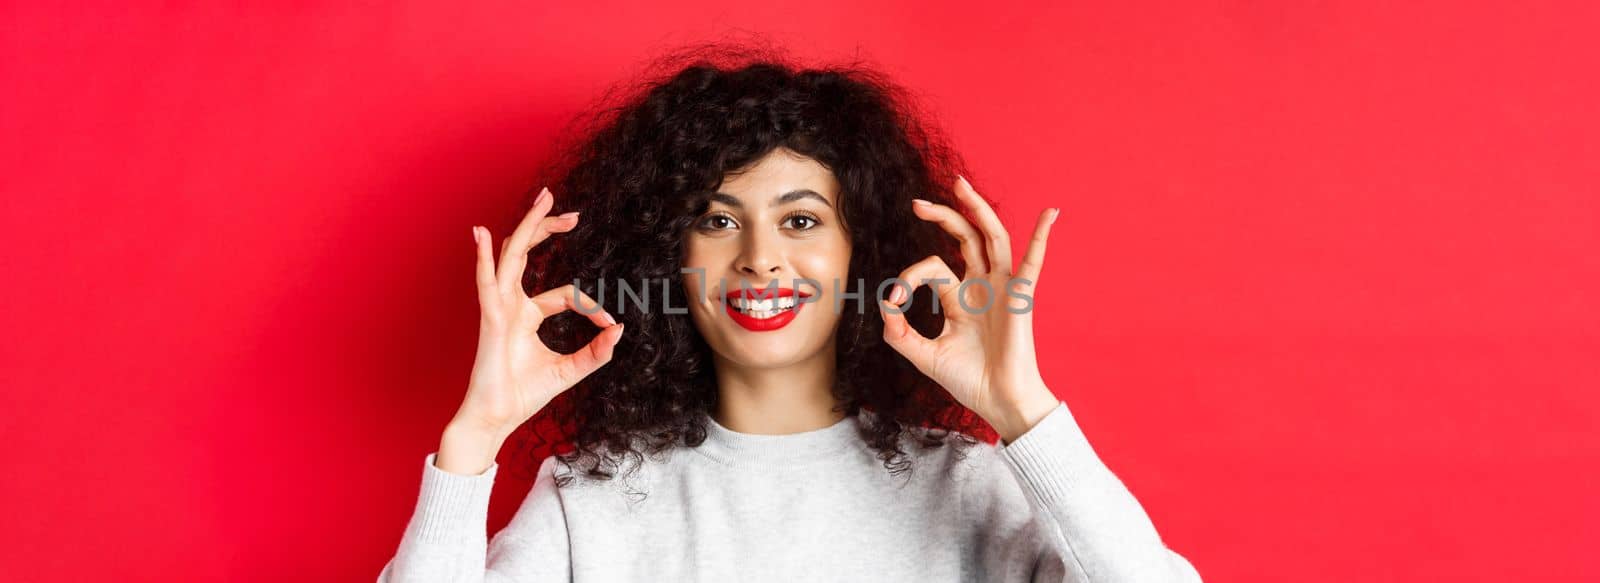 Close-up portrait of smiling woman with curly hair and red lips, showing okay gesture and looking satisfied, praise good product, standing on red background.